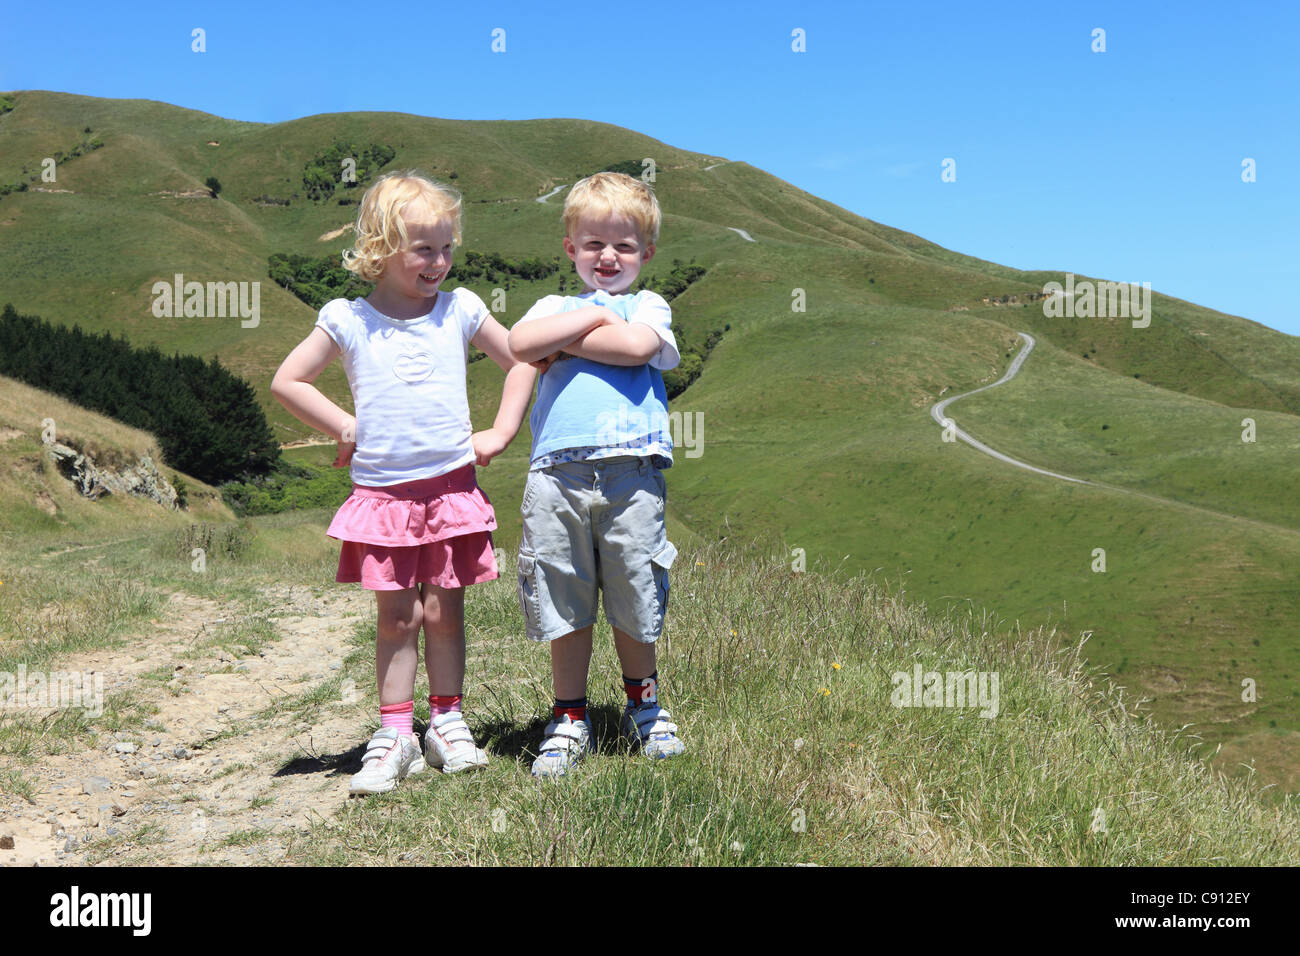 Being in the fresh air is good for children. Brother and sister standing outside in the sunshine. Stock Photo